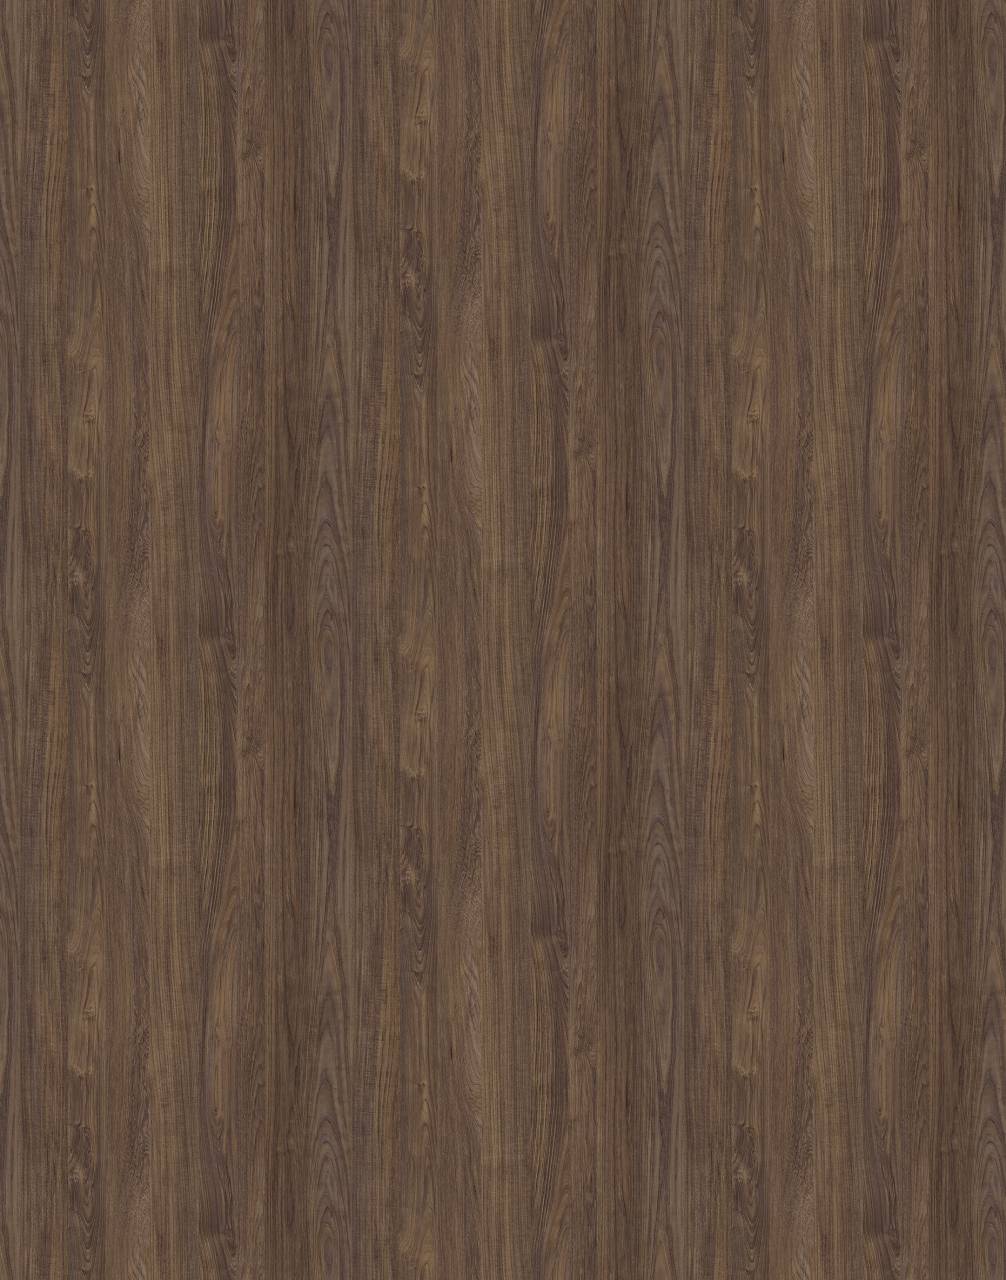 Vintage Marine Wood PW HPL with textured surface and medium brown tones for a rustic and nostalgic look.